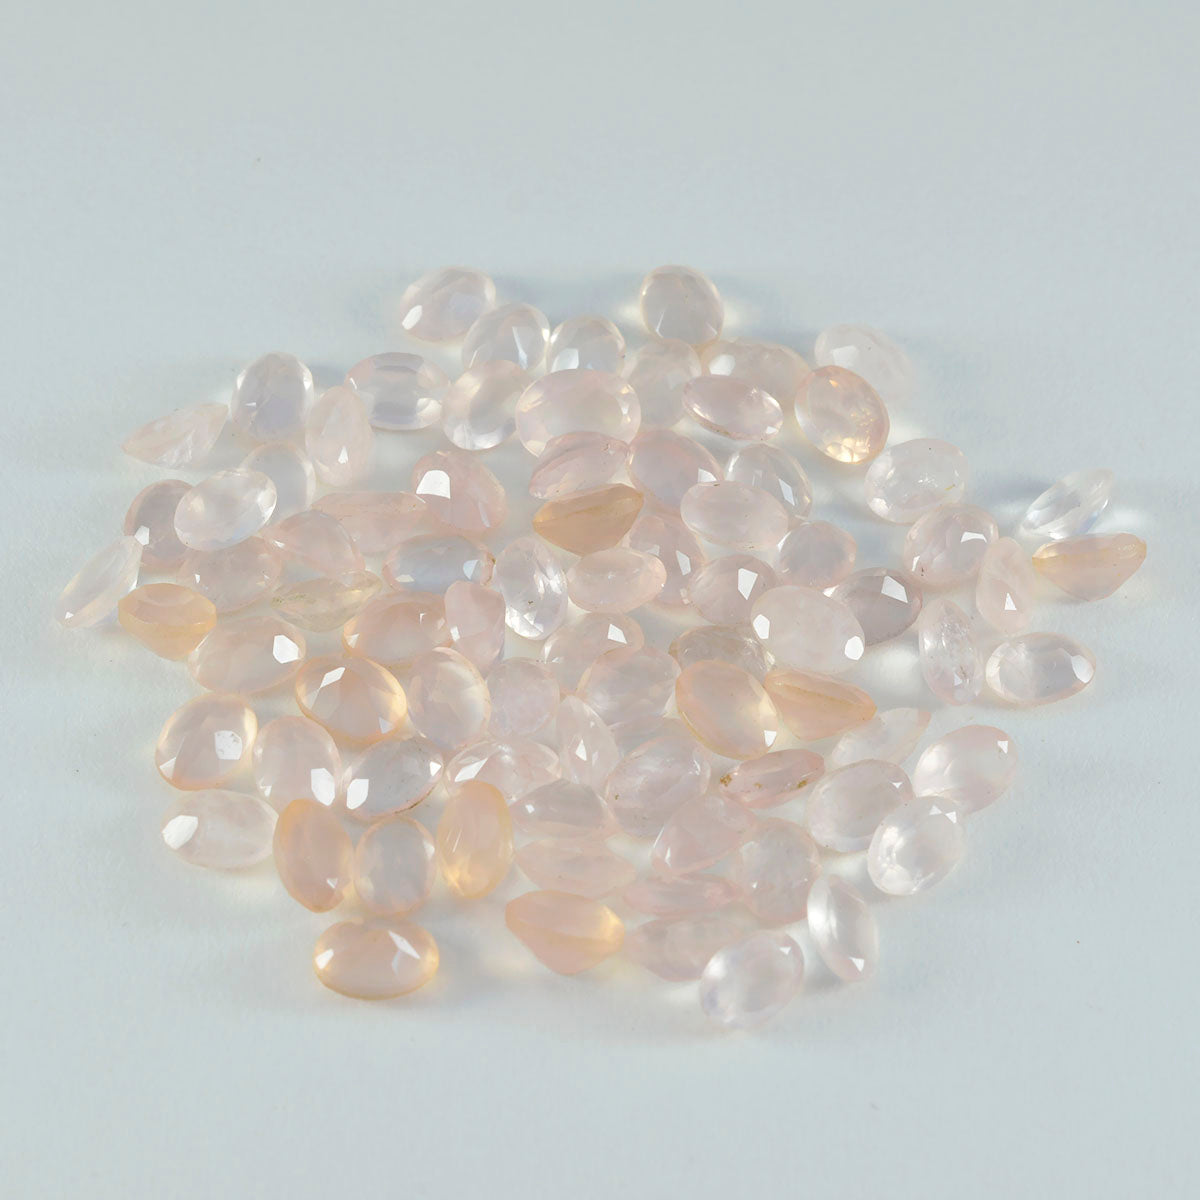 Riyogems 1PC Pink Rose Quartz Faceted 3x5 mm Oval Shape good-looking Quality Loose Stone